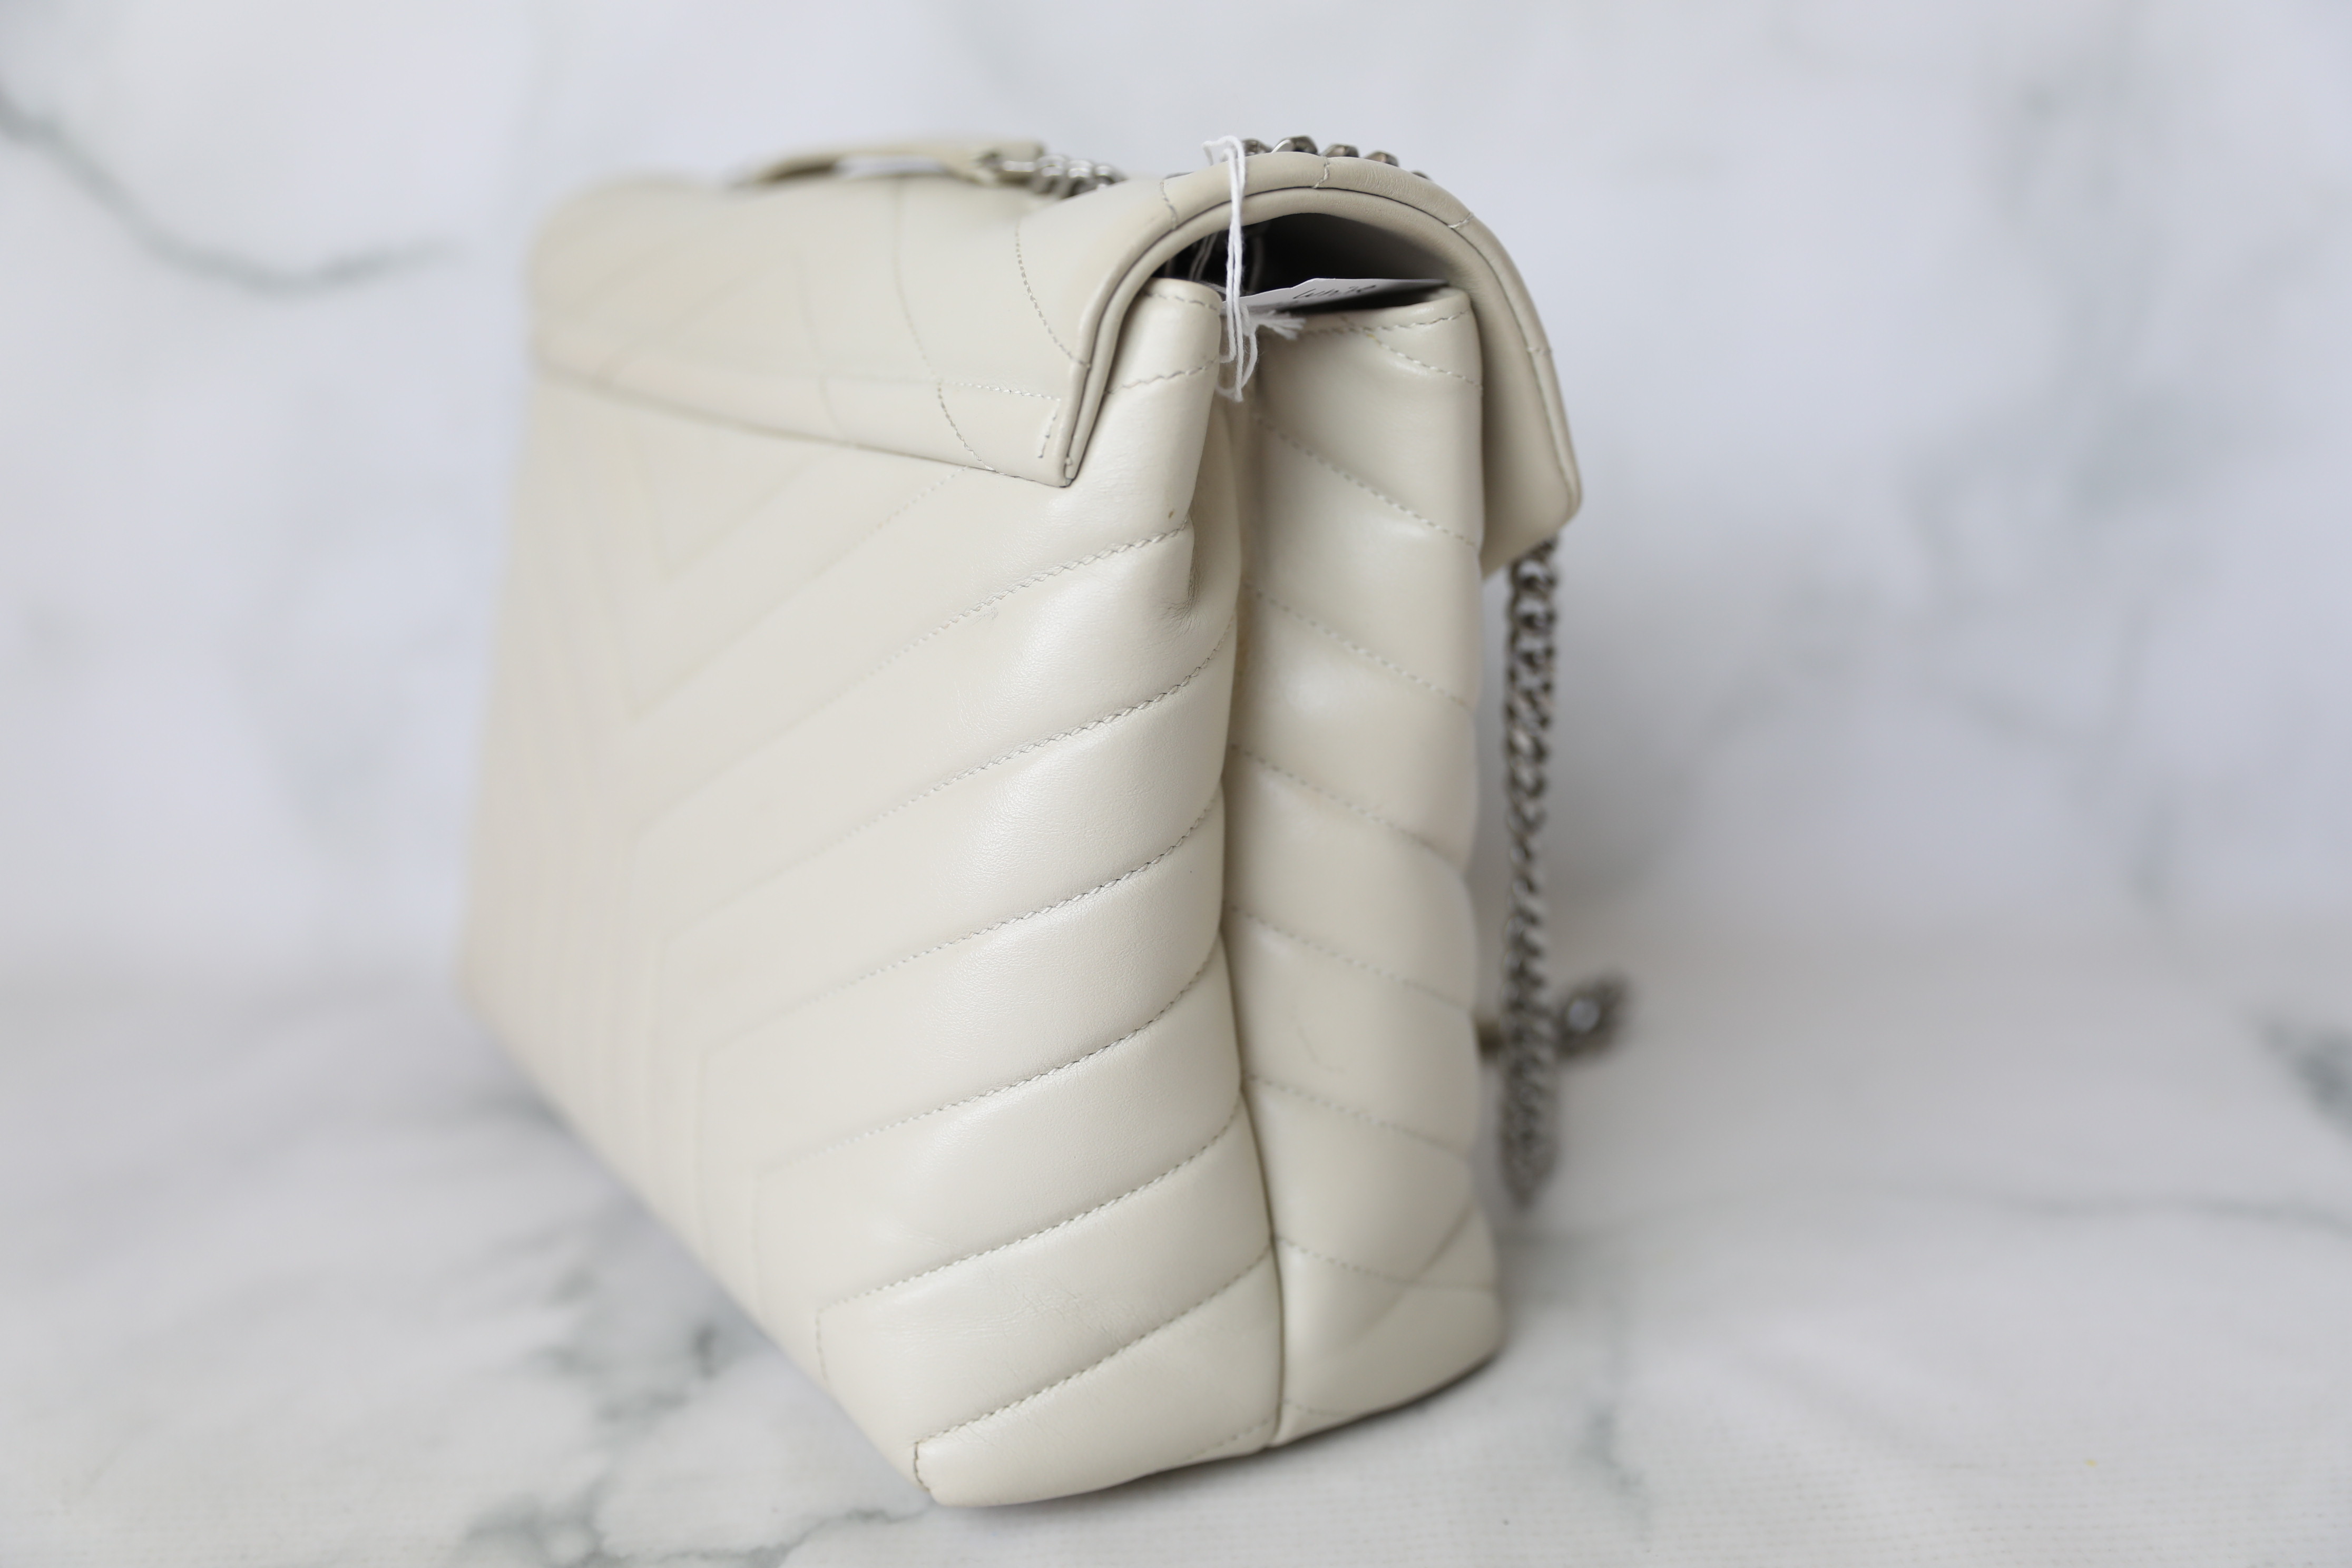 Saint Laurent Lou Lou Medium, Cream White with Silver Hardware, Preowned in  Dustbag WA001